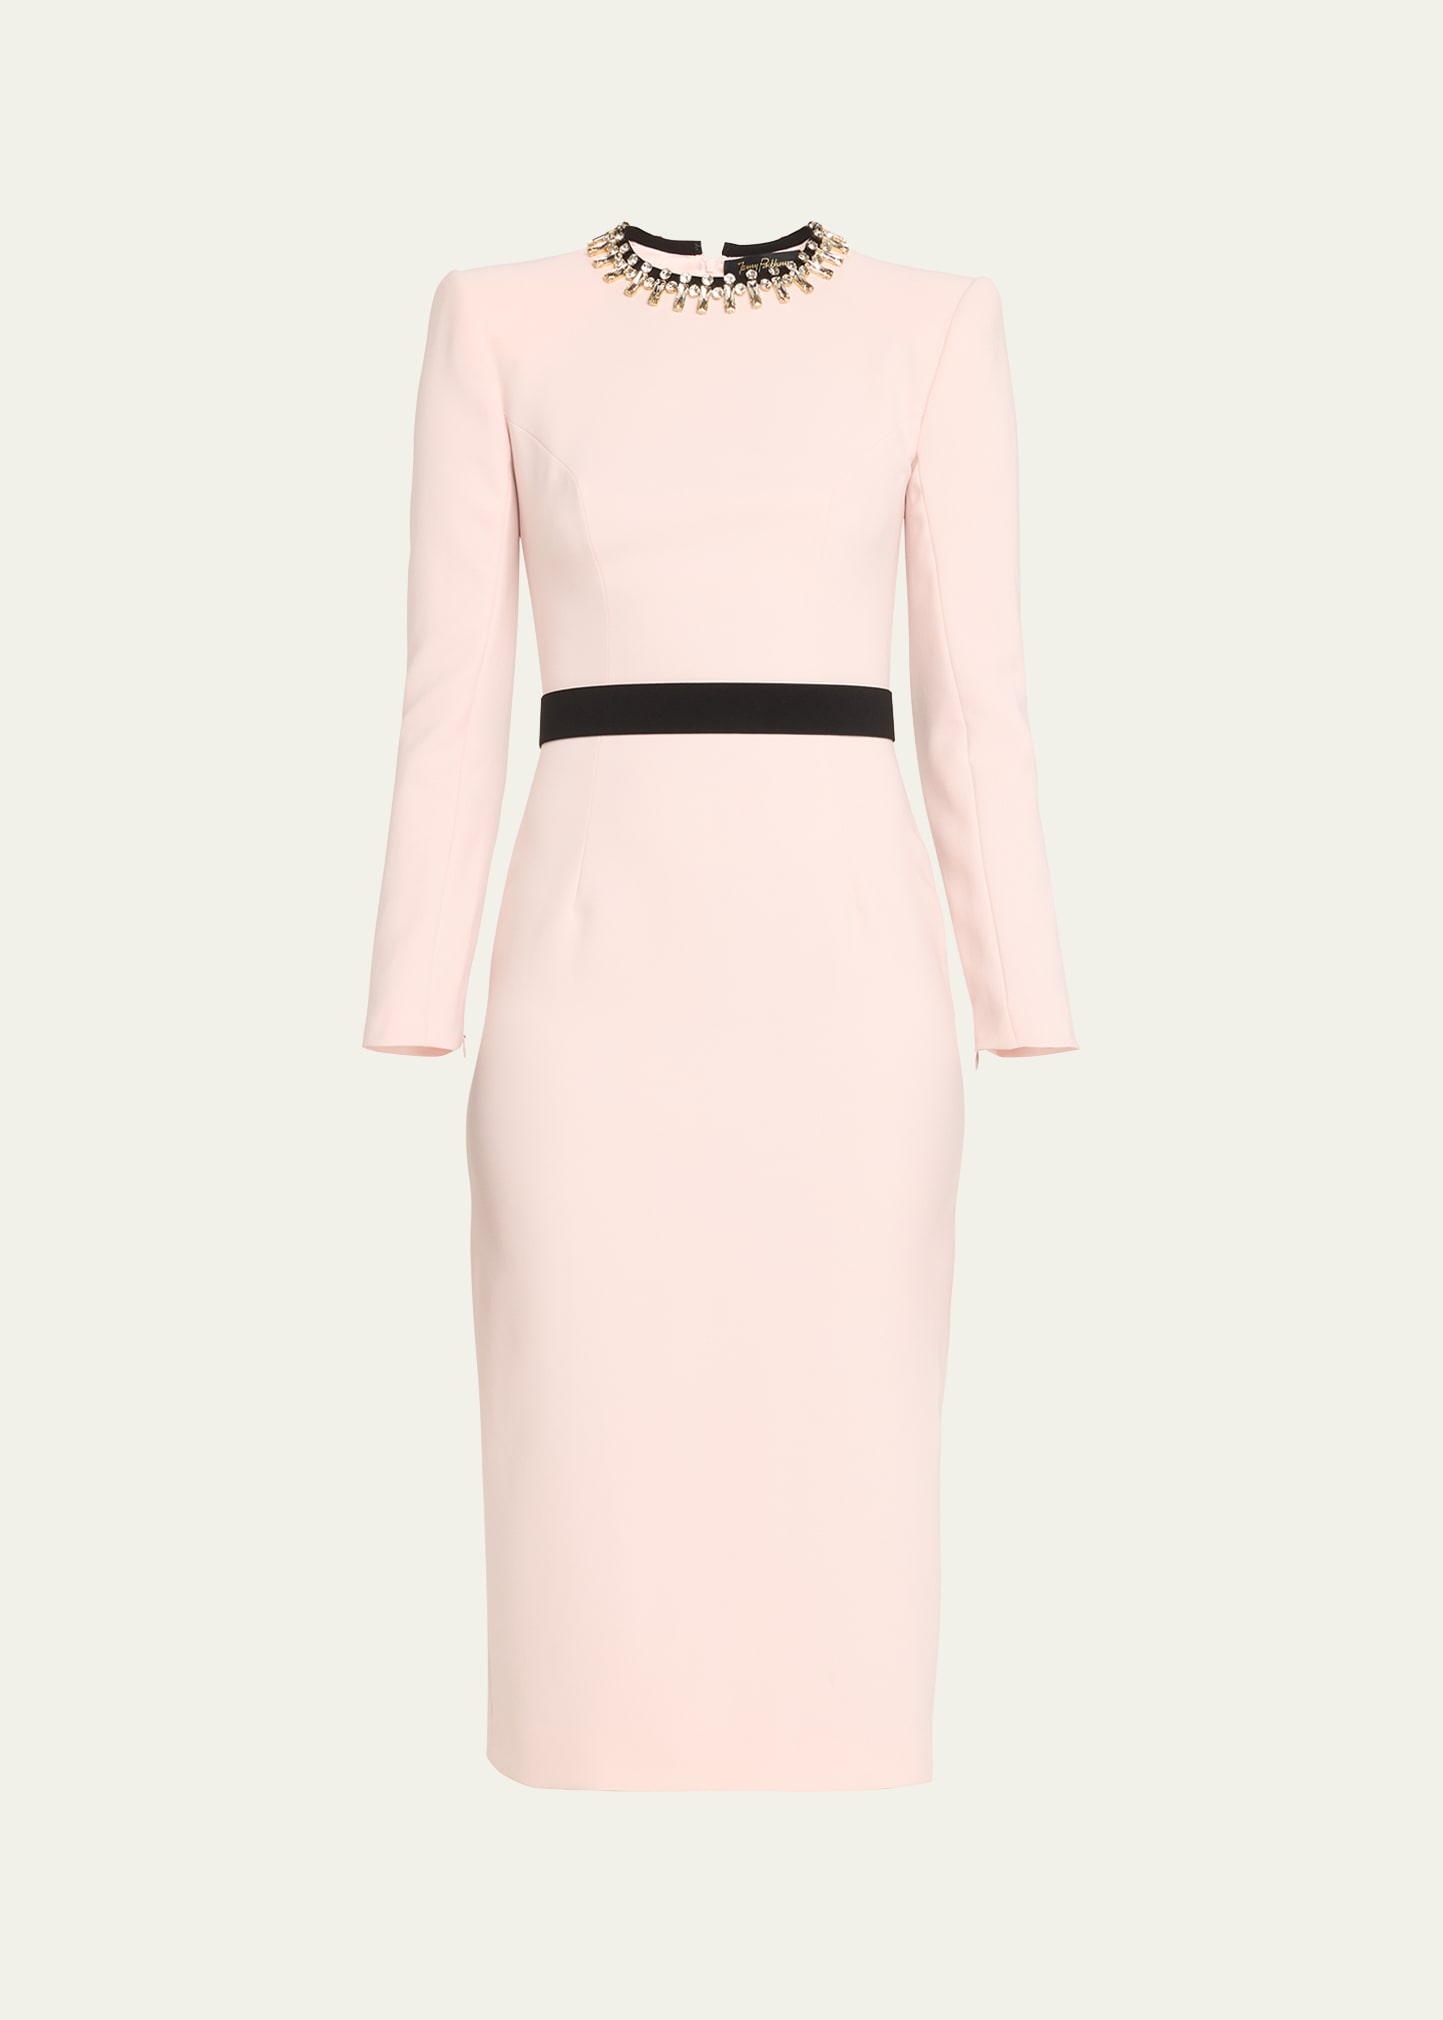 Jenny Packham Thetis Embellished Sheath Dress In Fox Coral